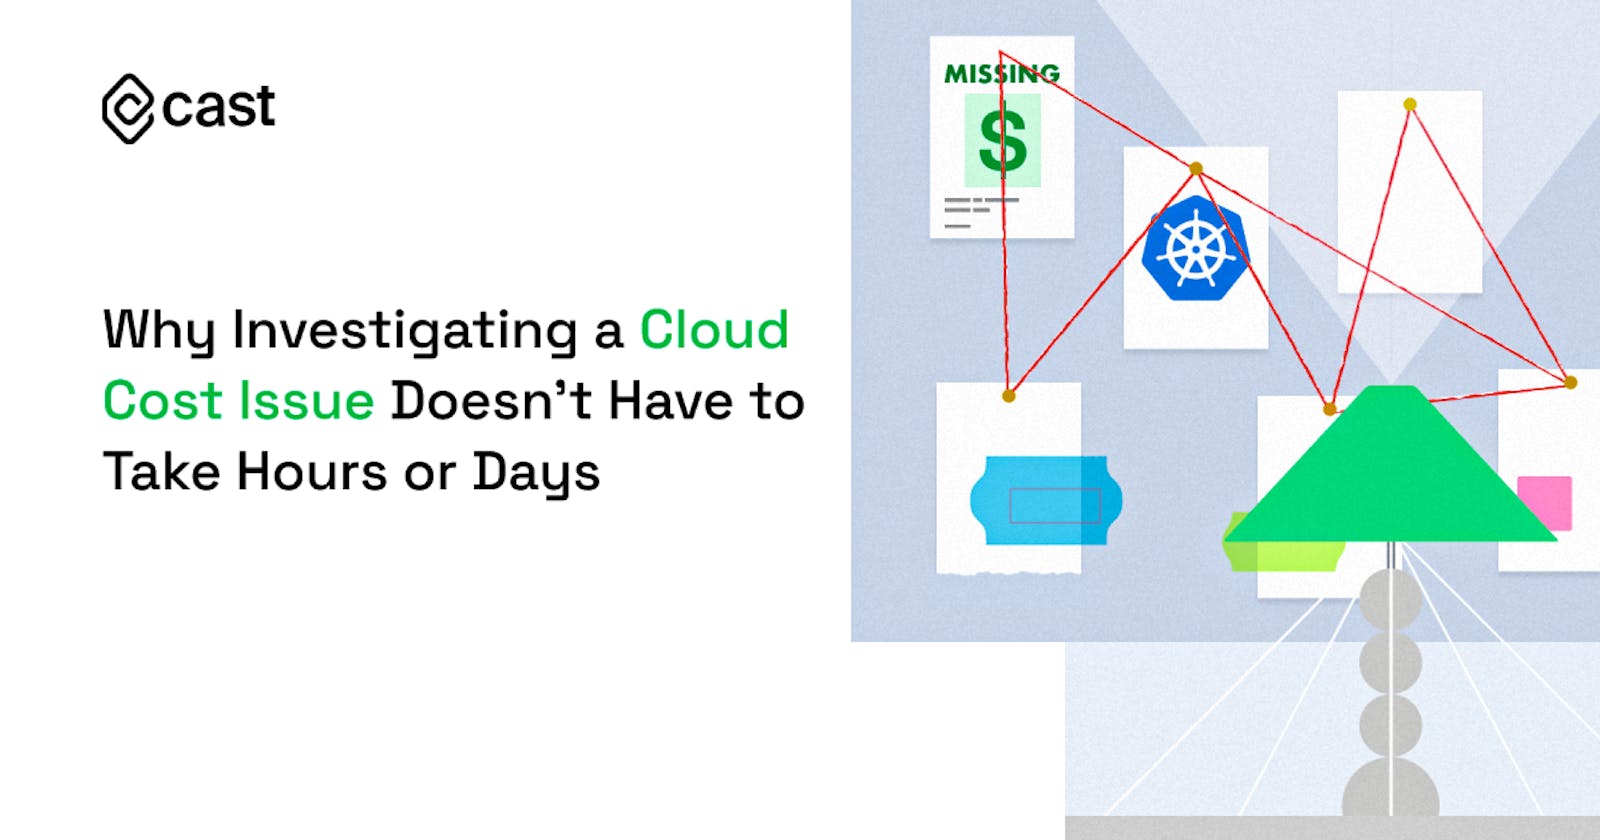 Why Investigating a Cloud Cost Issue Doesn’t Have to Take Hours or Days